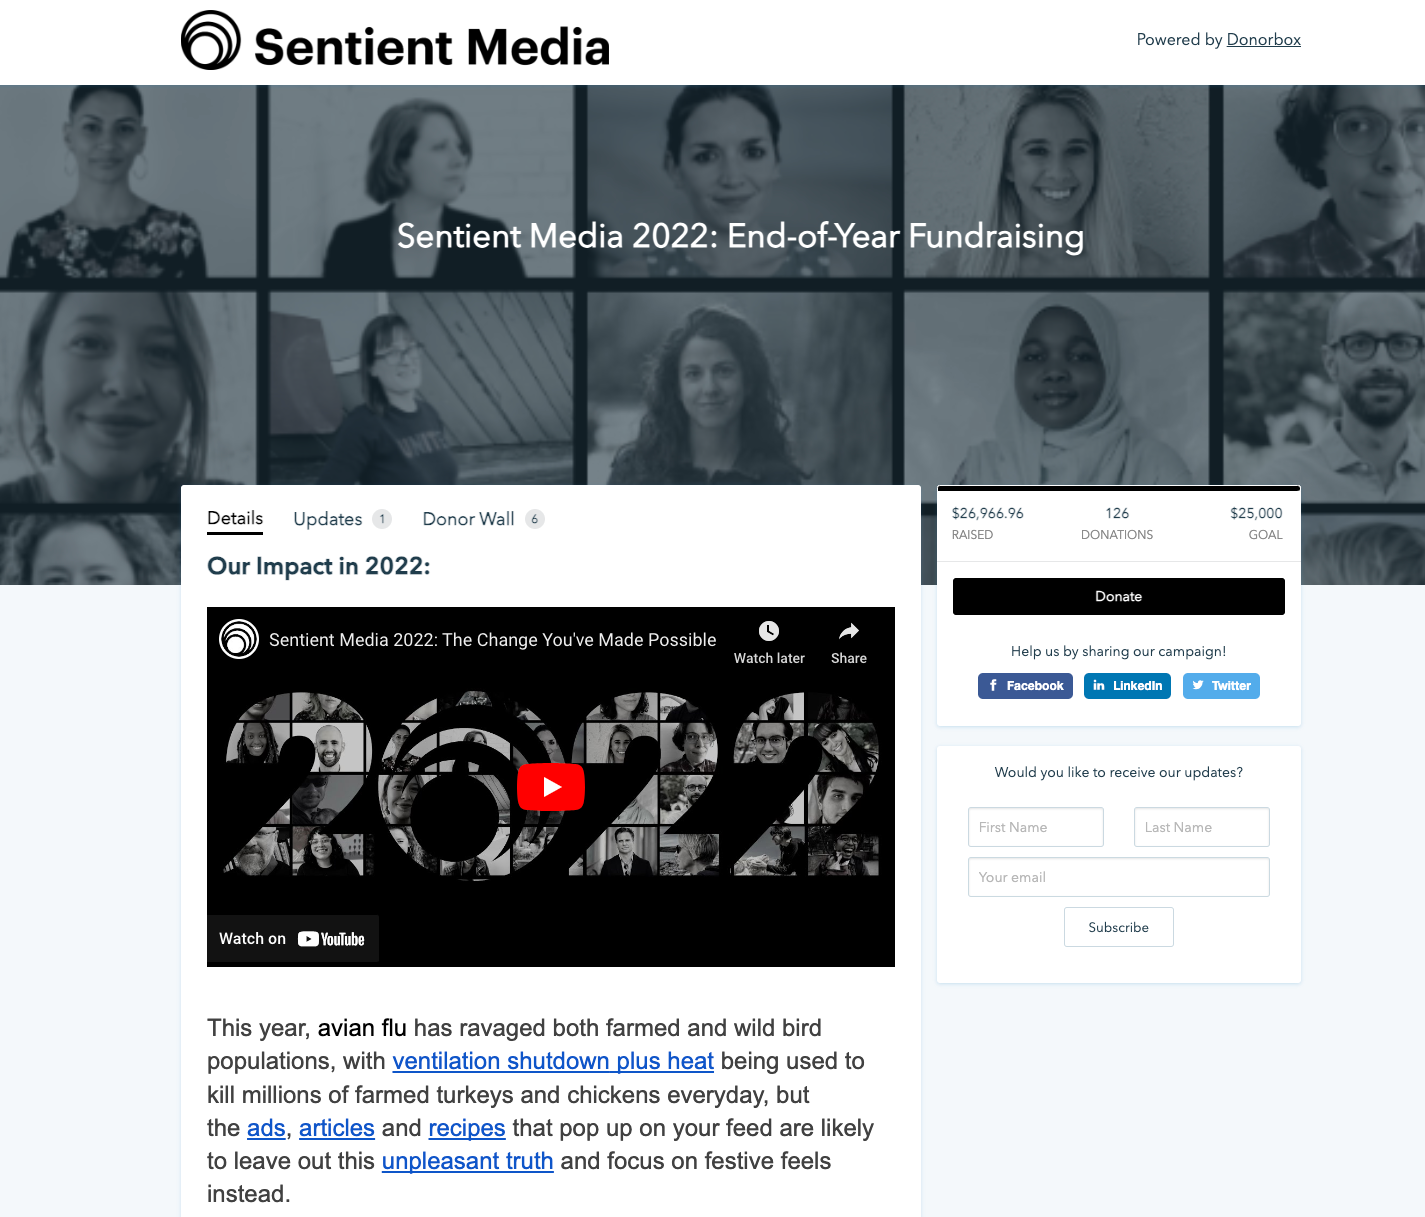 Sentient Media - 2022 Year-End Appeal Campaign on Donorbox